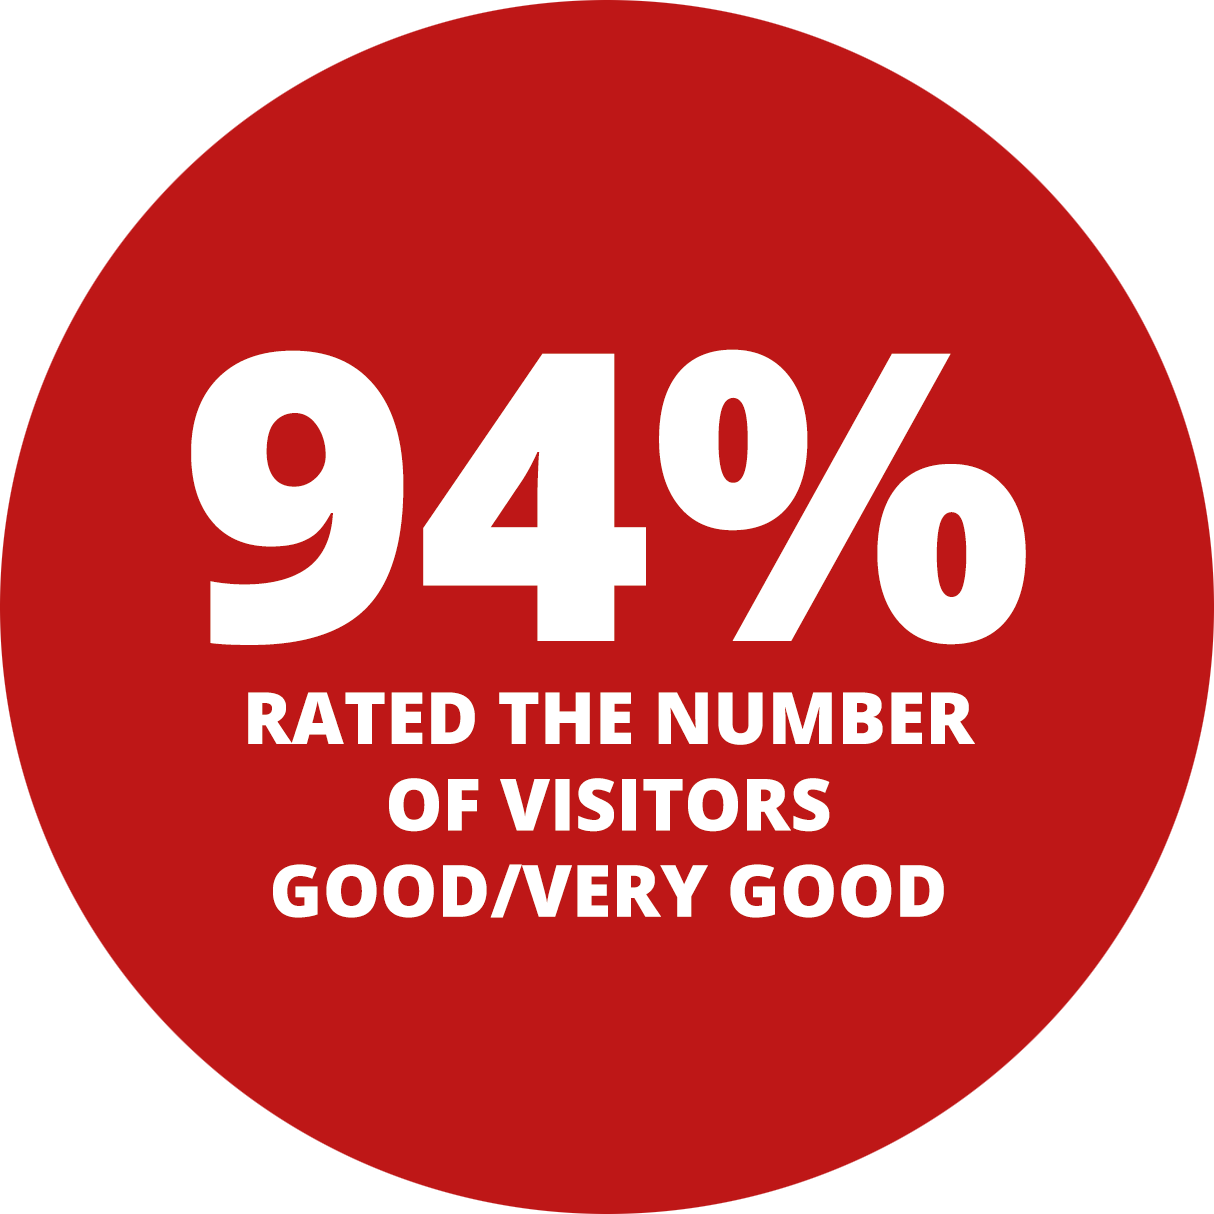 94% rated the number of visitors Good/Very good